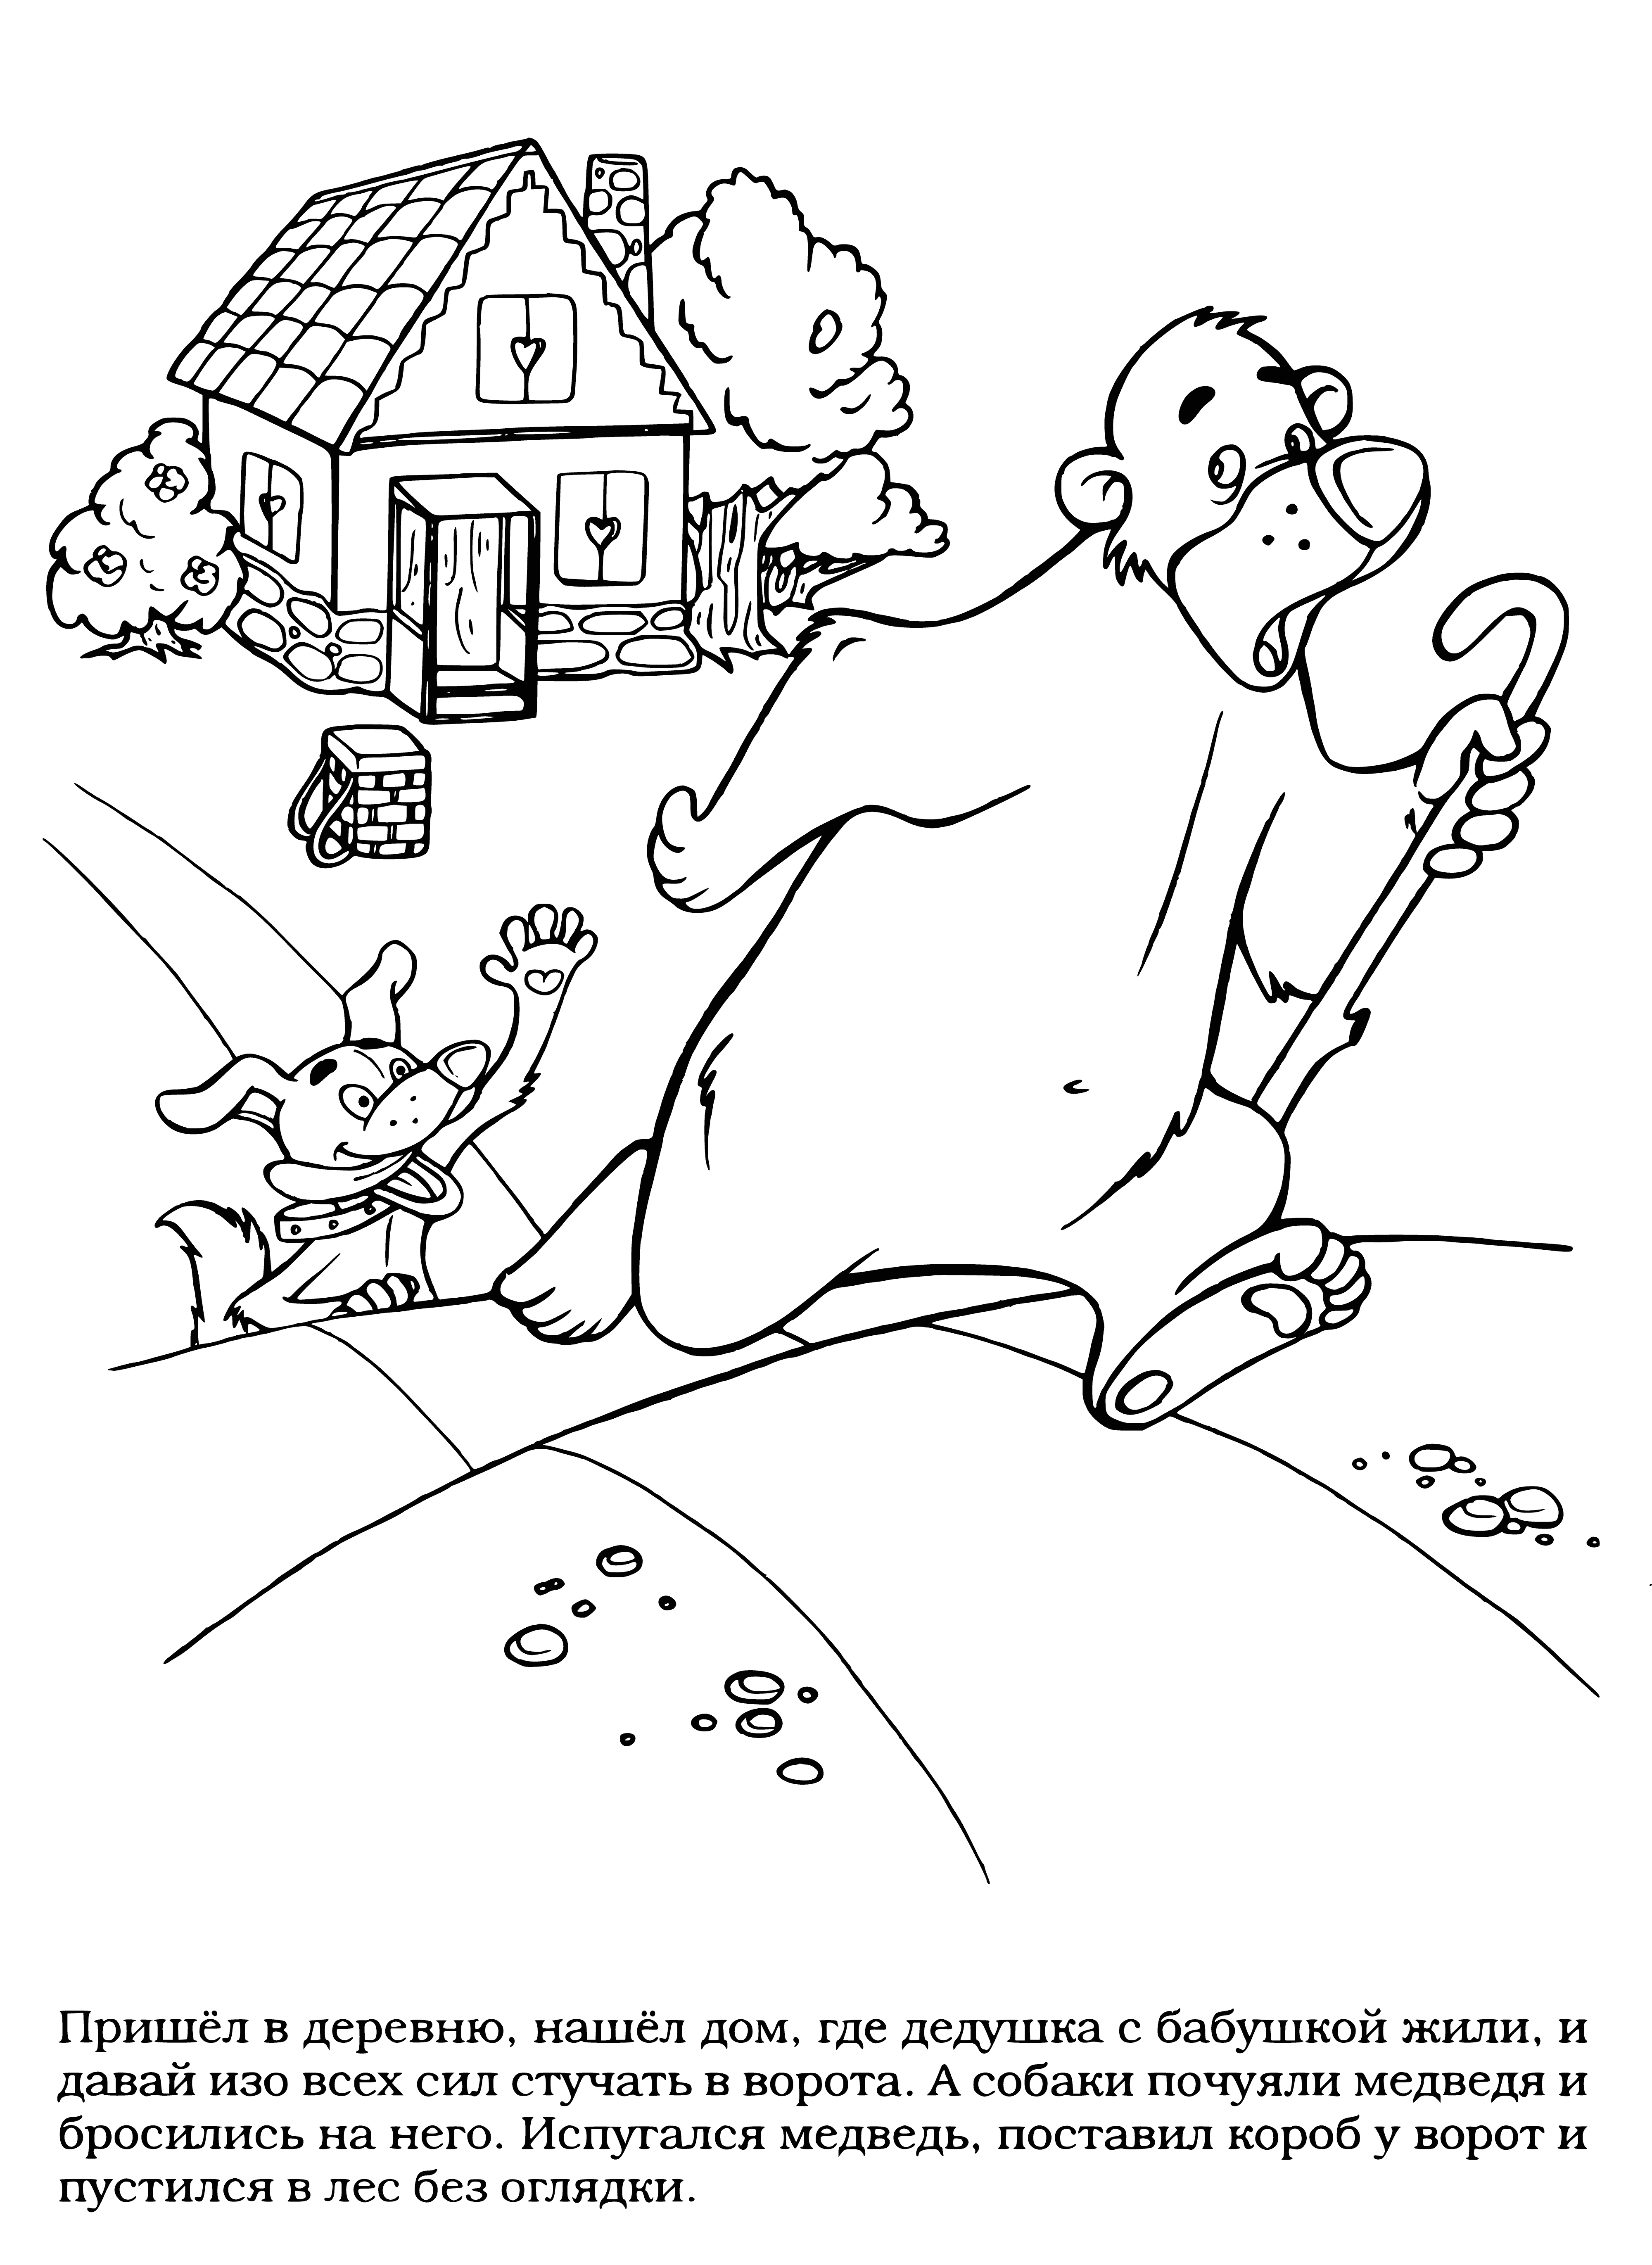 coloring page: 140: A scared bear is running fast in the coloring page.